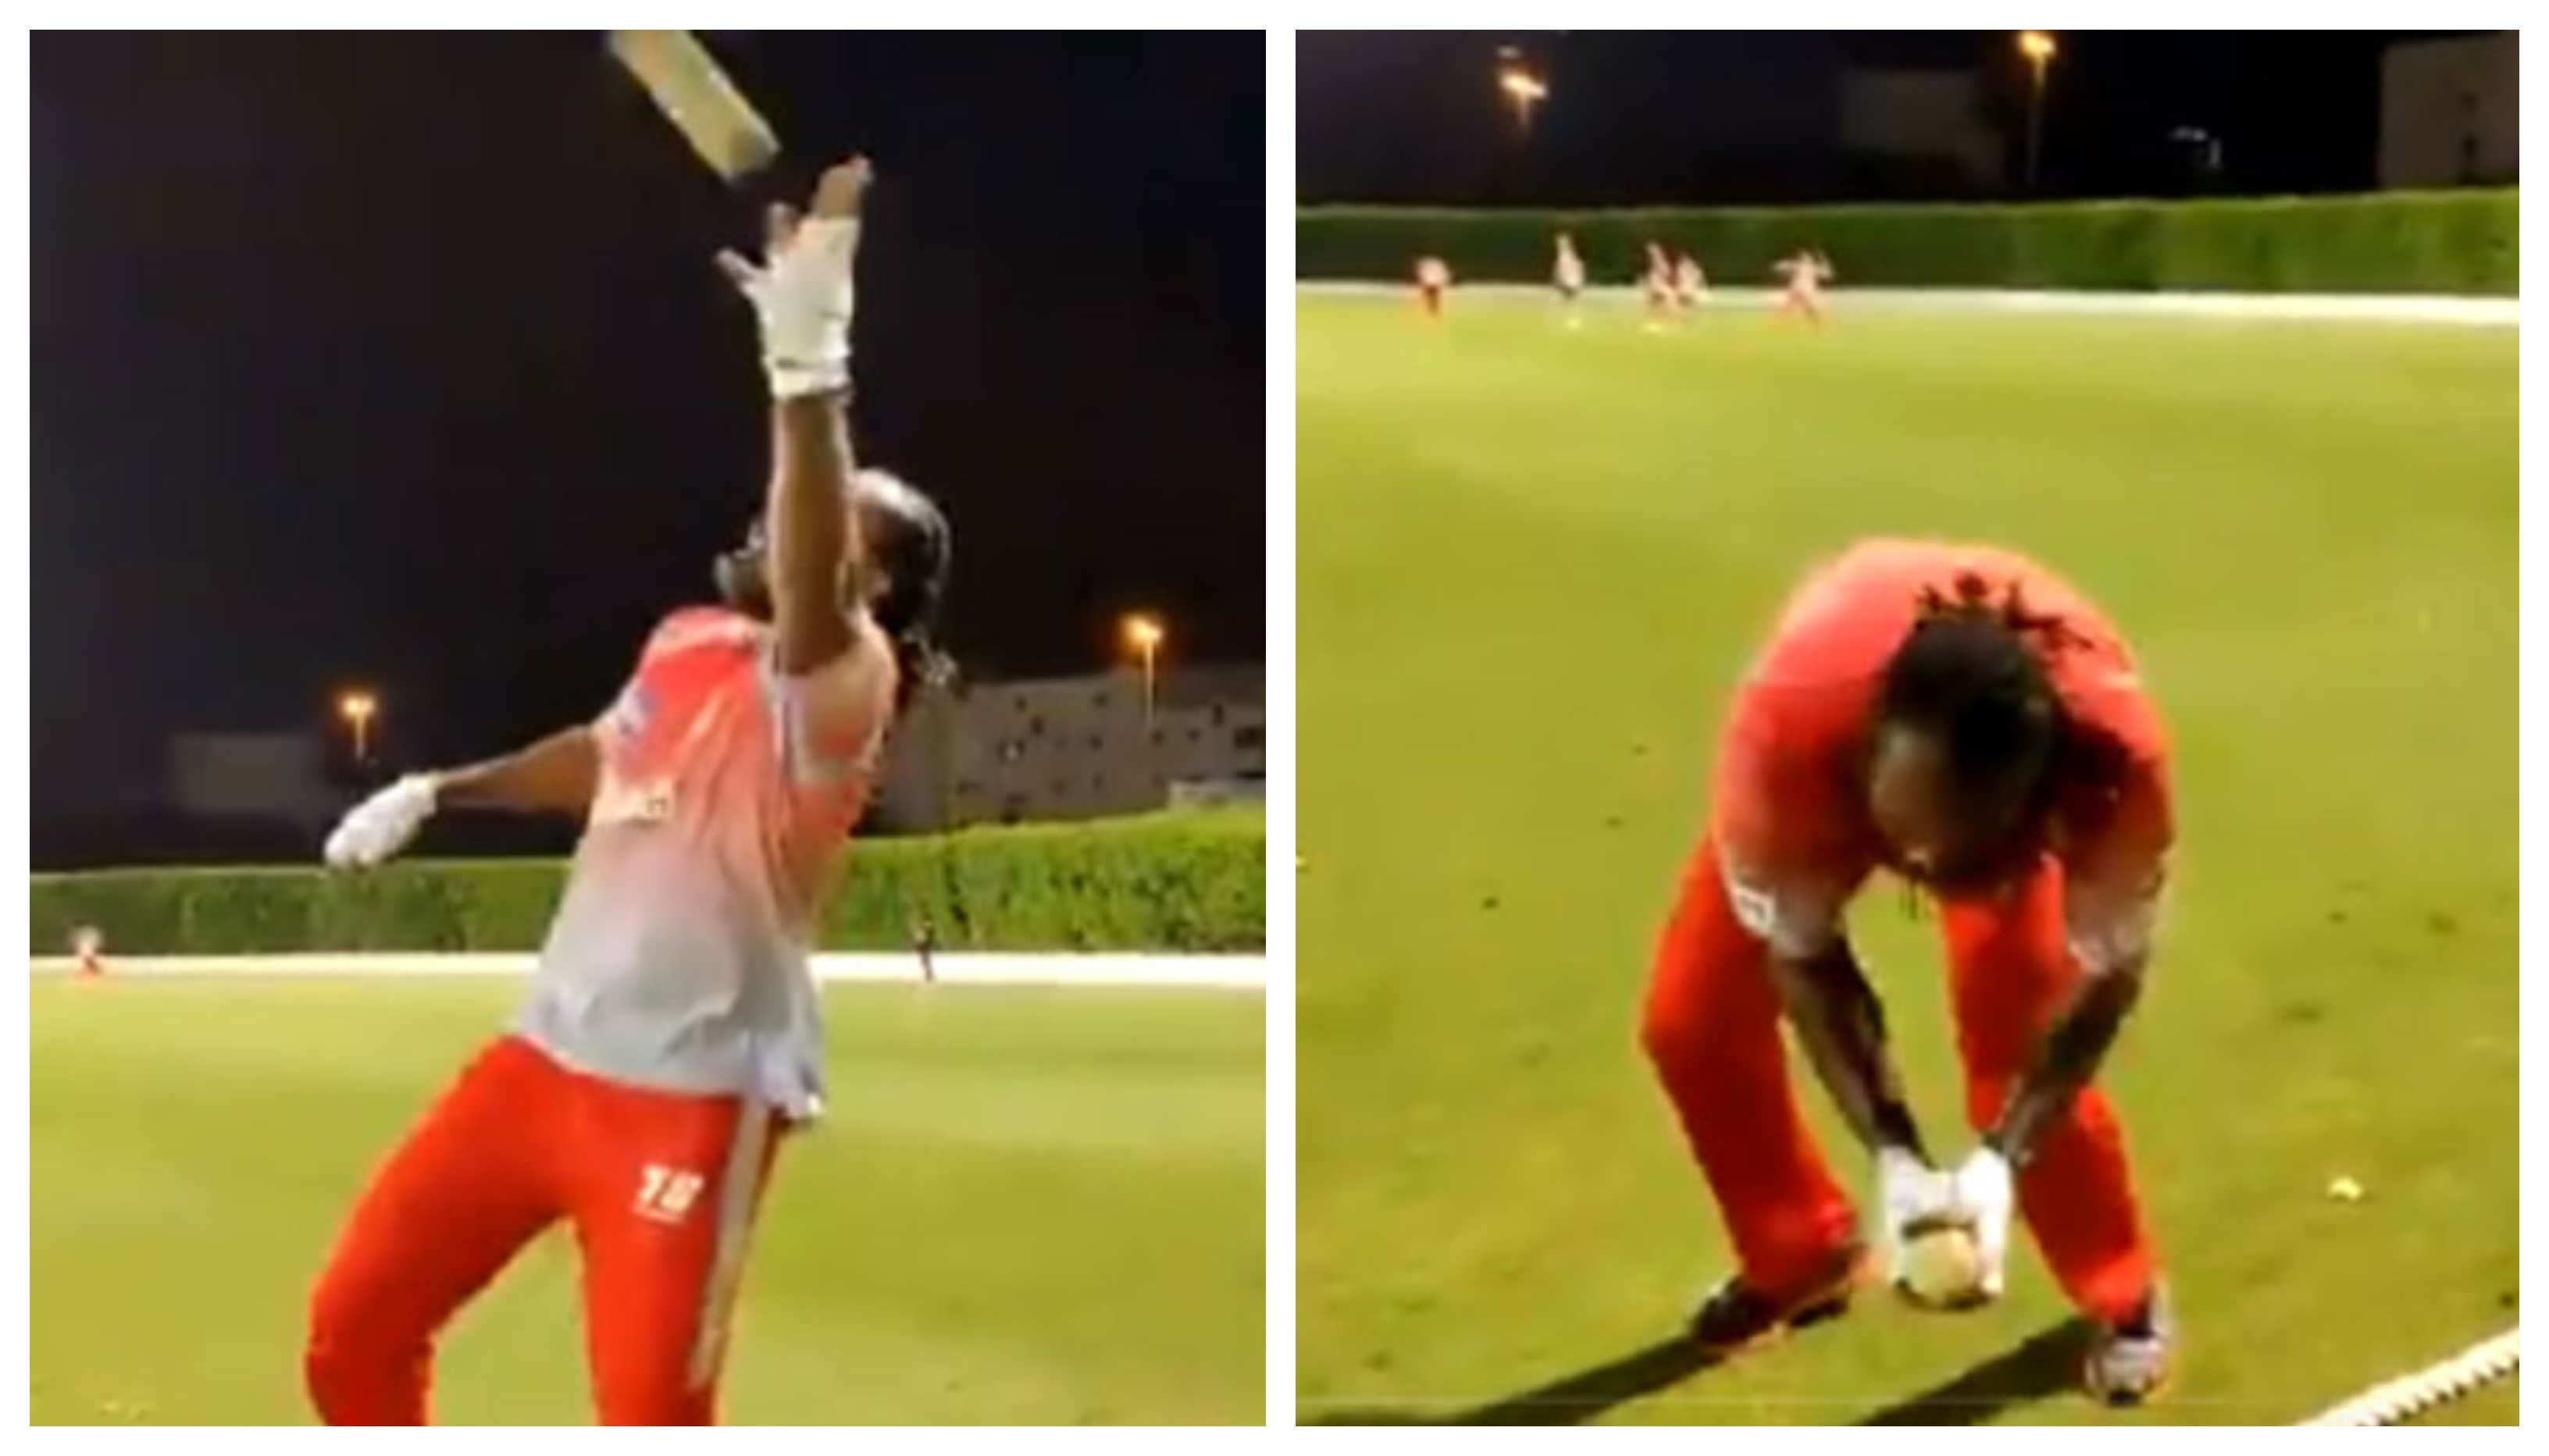 Chris Gayle takes a great catch during the practice session | Screengrab